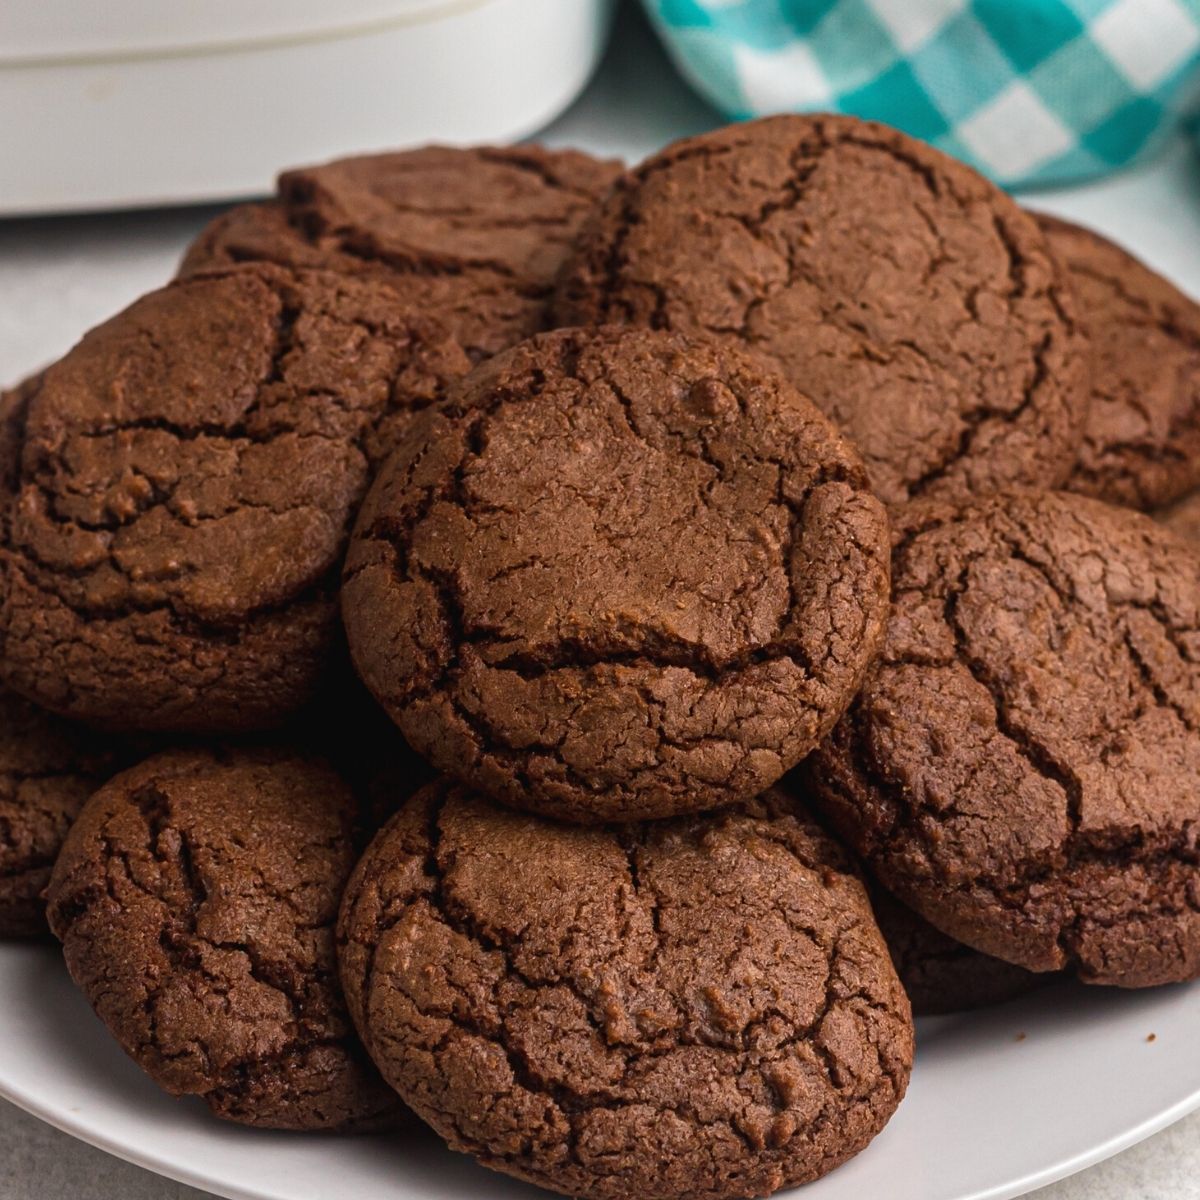 Gooey chocolate cookies on a white plate in front of an air fryer.